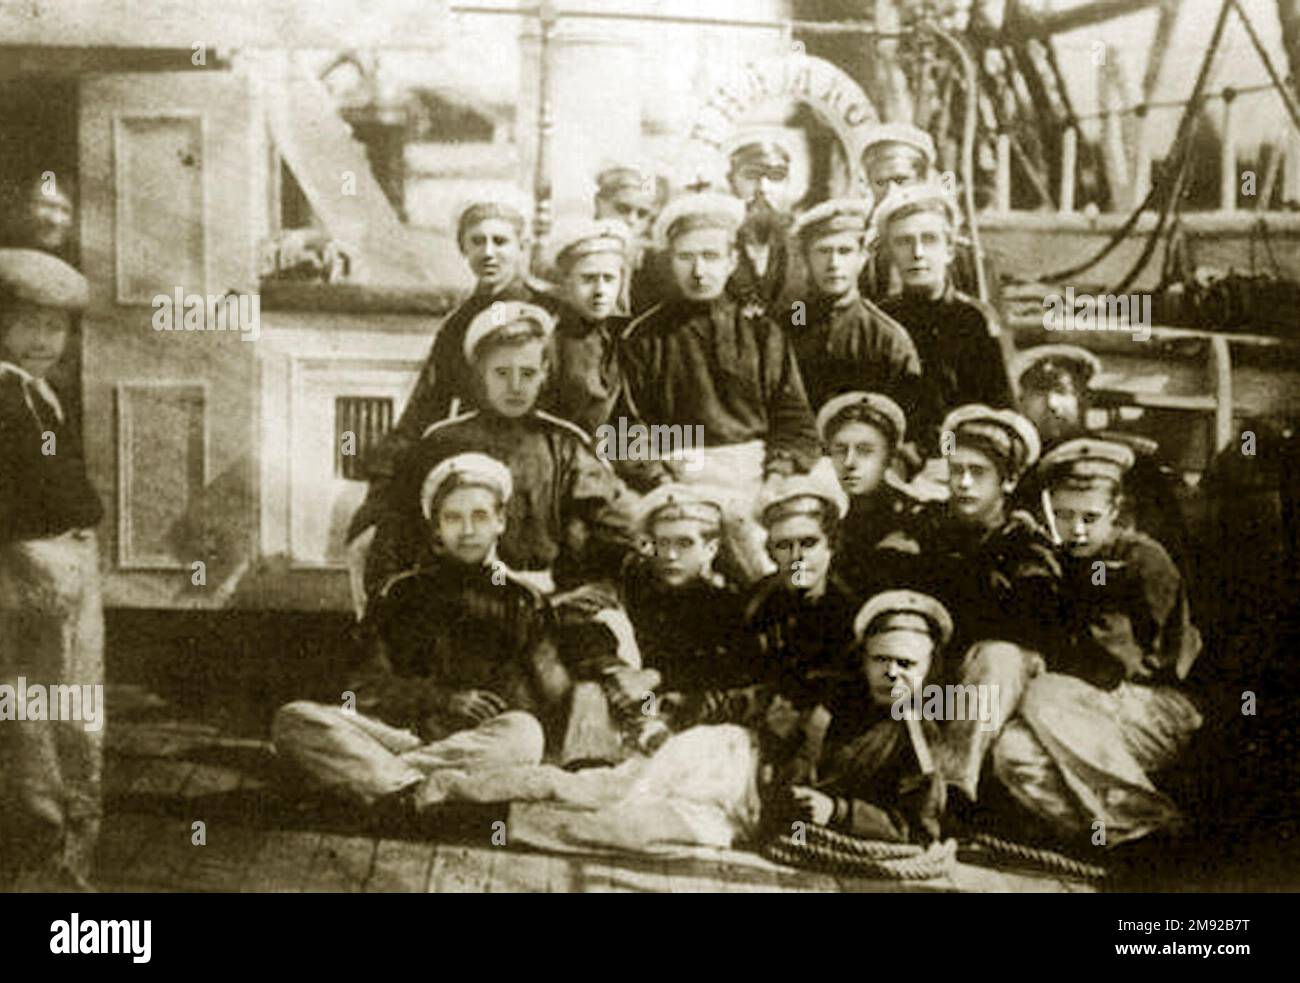 Midshipmen of the Imperial Naval School (graduated in 1884) in training navigation on the corvette Gilyak. In the center is Alexei Nikolaevich Krylov. First on the right is Konstantin Fedorovich Schultz, next to him is Ludwig Bernhardovich Kerber. ca.  1884 Stock Photo